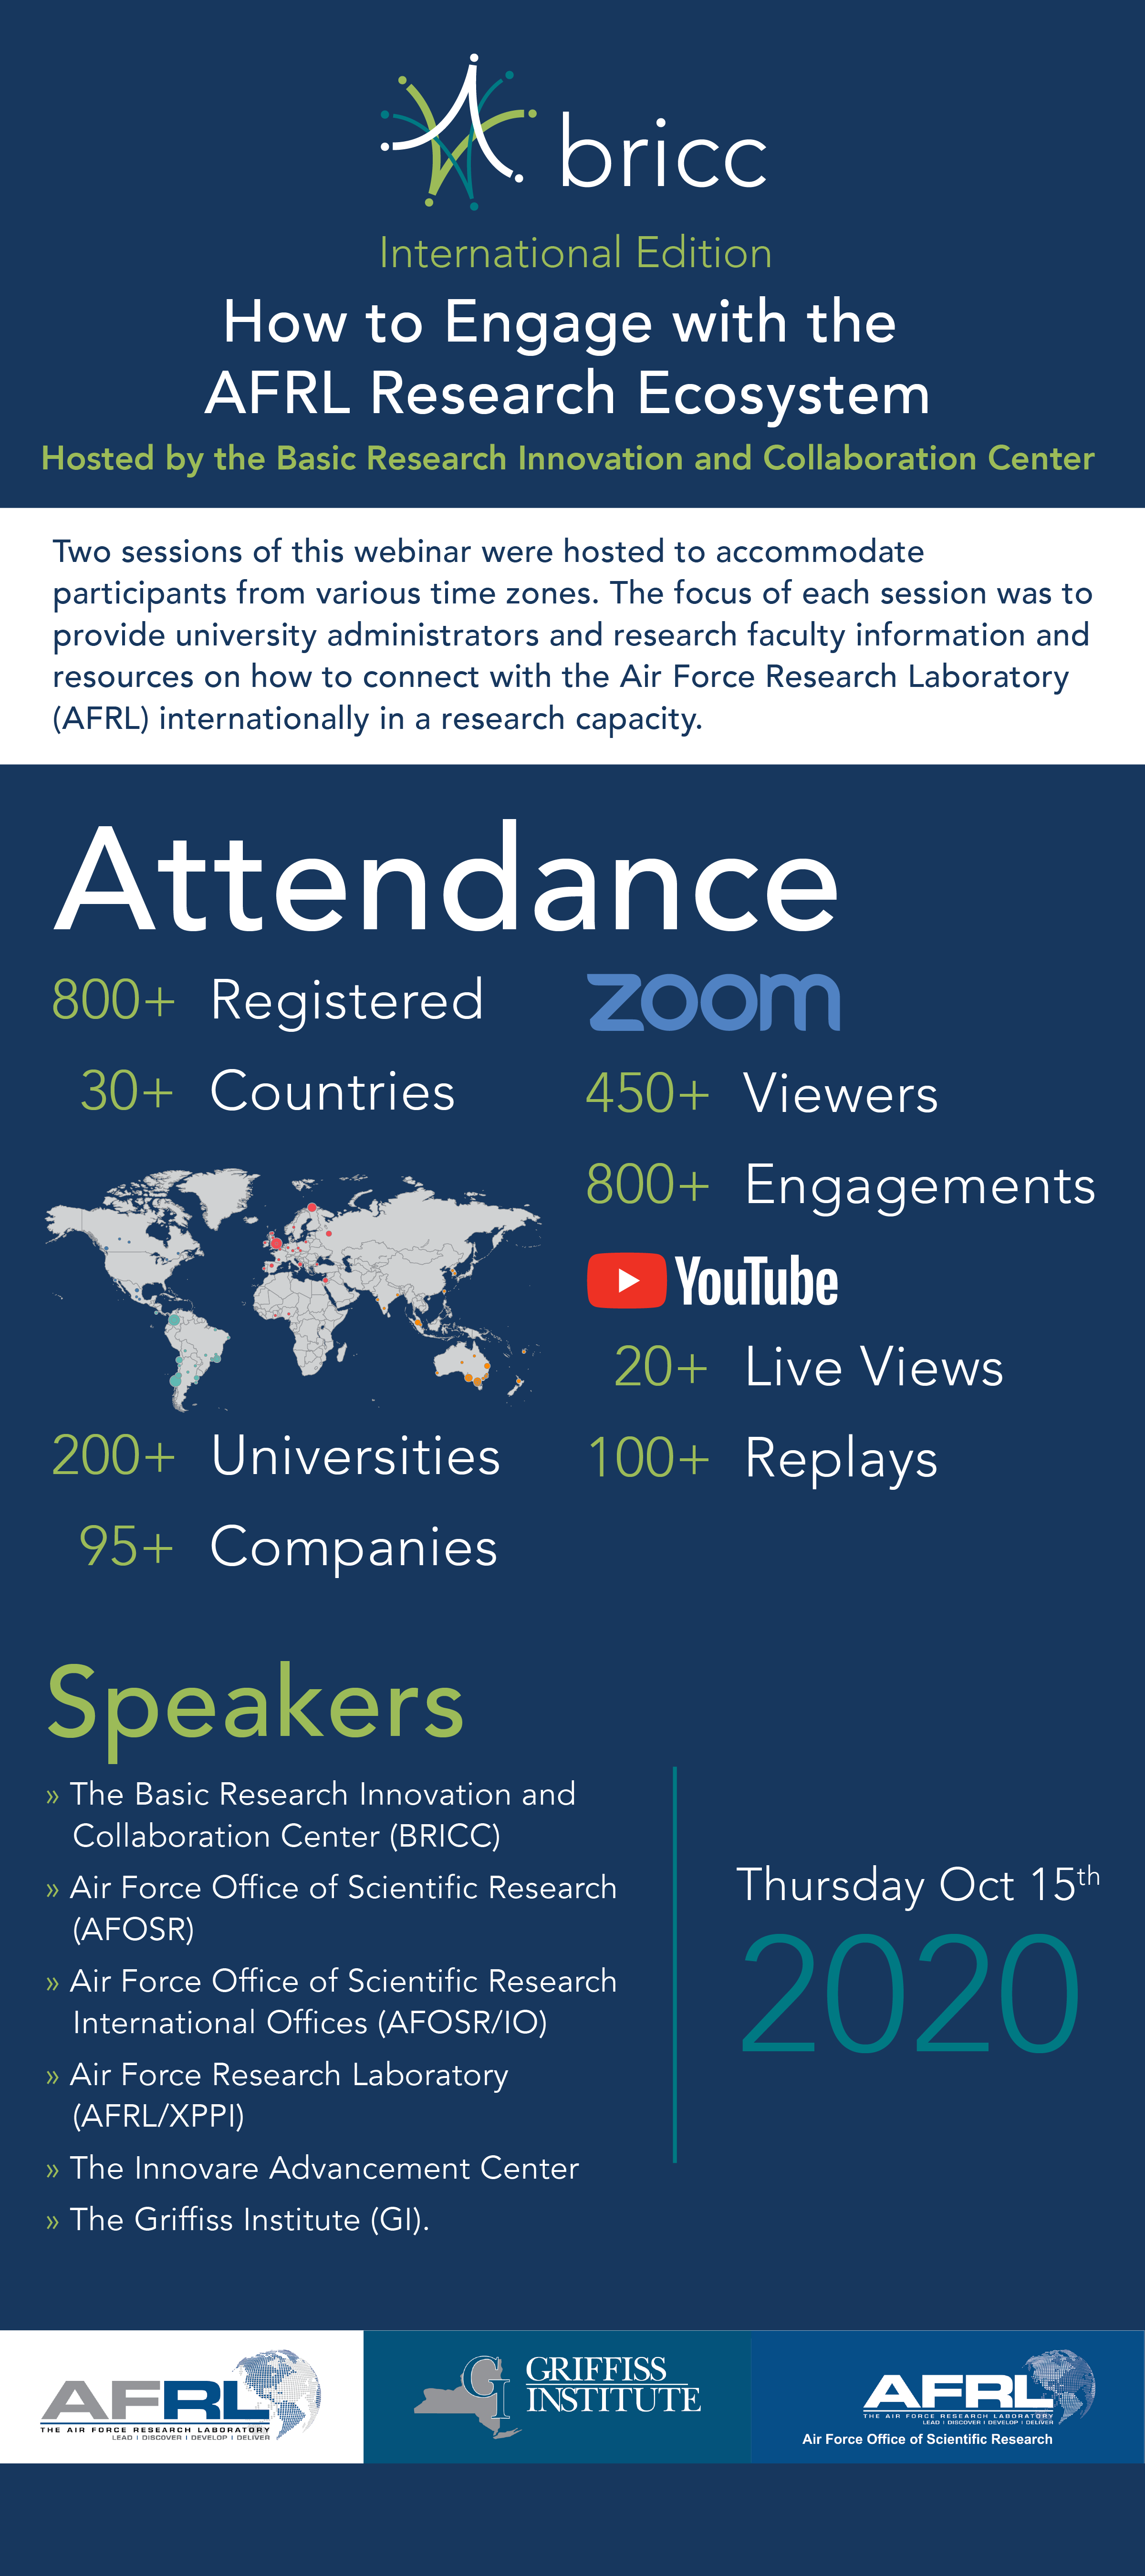 Infographic showing statistics of the "How to Engage with the AFRL Research Ecosystem" event